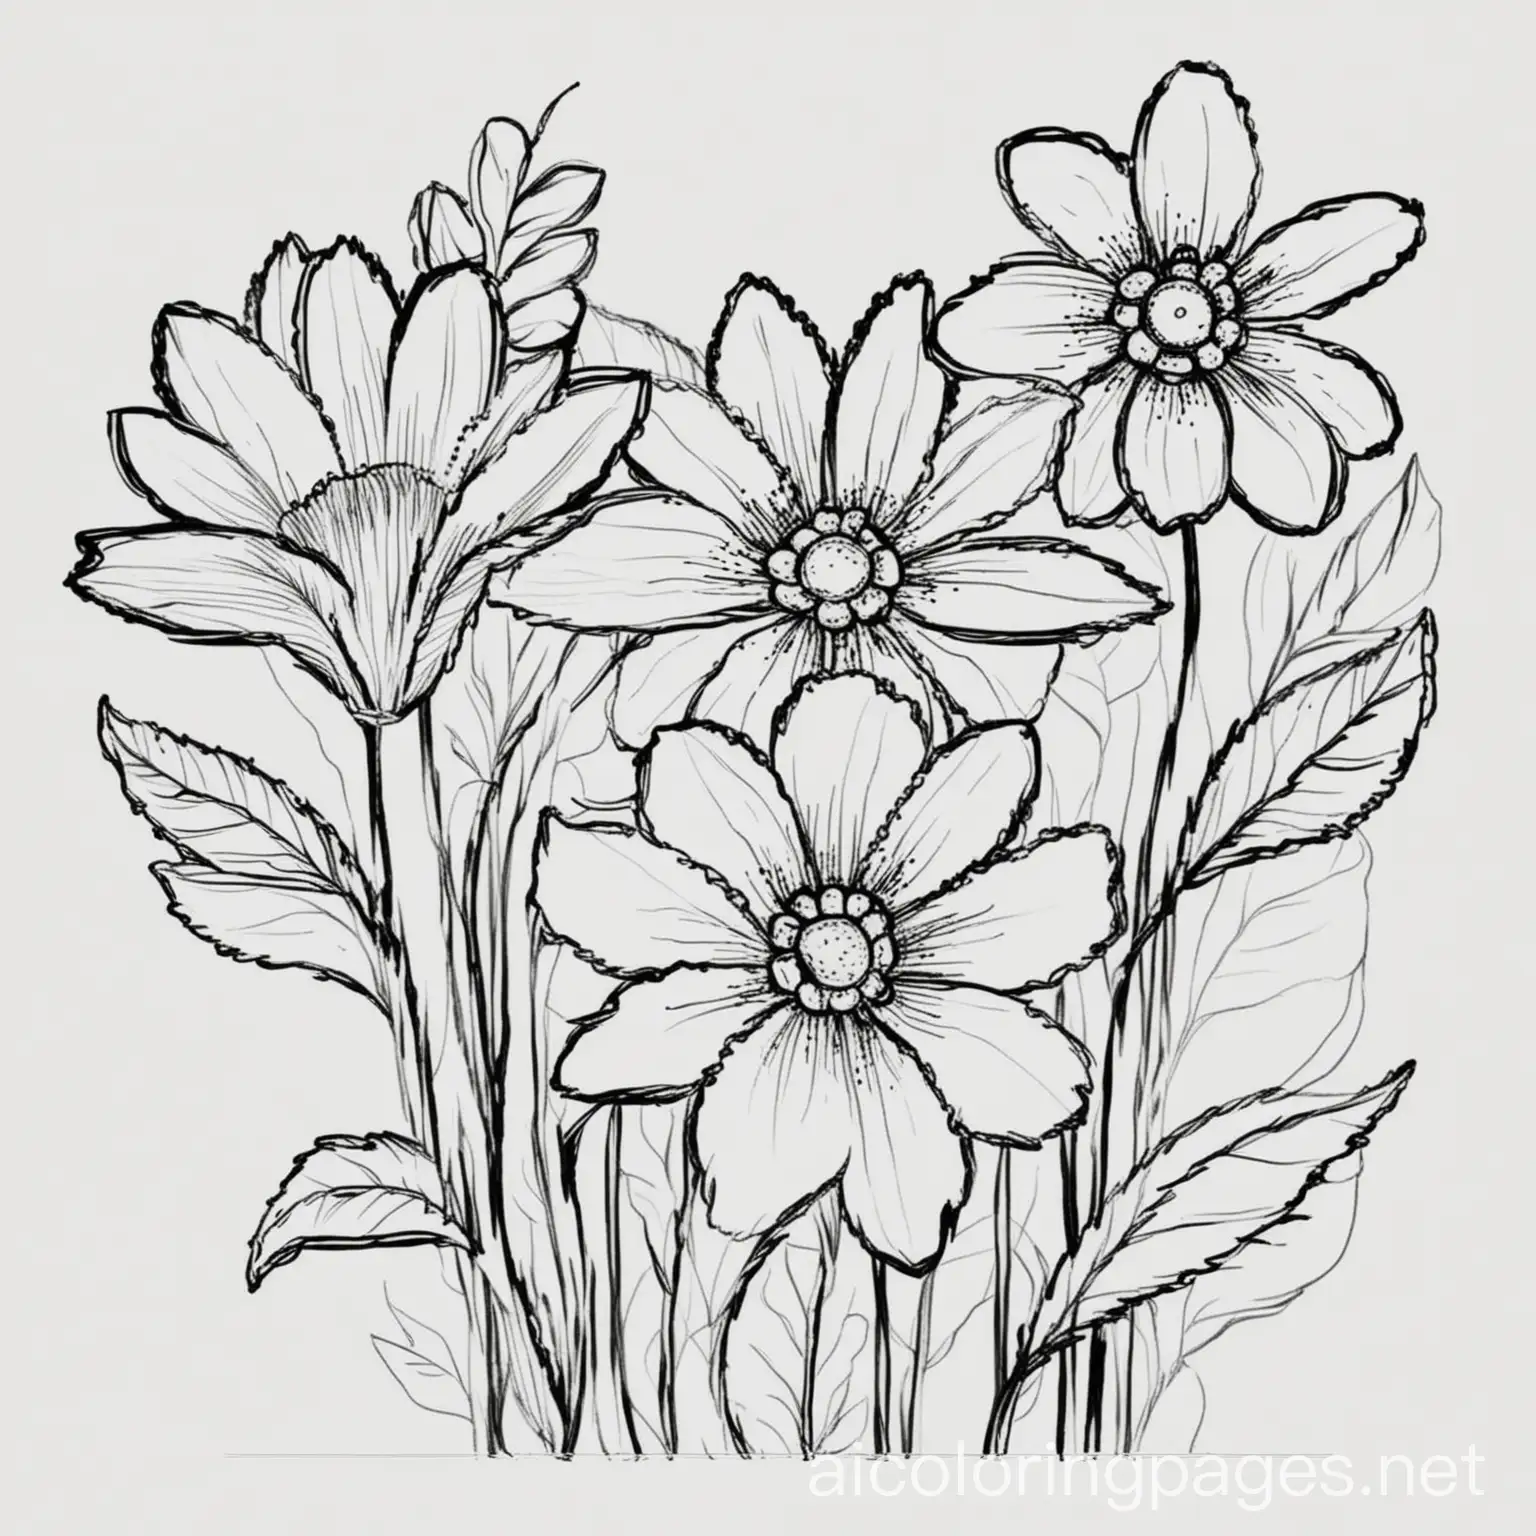 Outline of flowers, Coloring Page, black and white, line art, white background, Simplicity, Ample White Space. The background of the coloring page is plain white to make it easy for young children to color within the lines. The outlines of all the subjects are easy to distinguish, making it simple for kids to color without too much difficulty